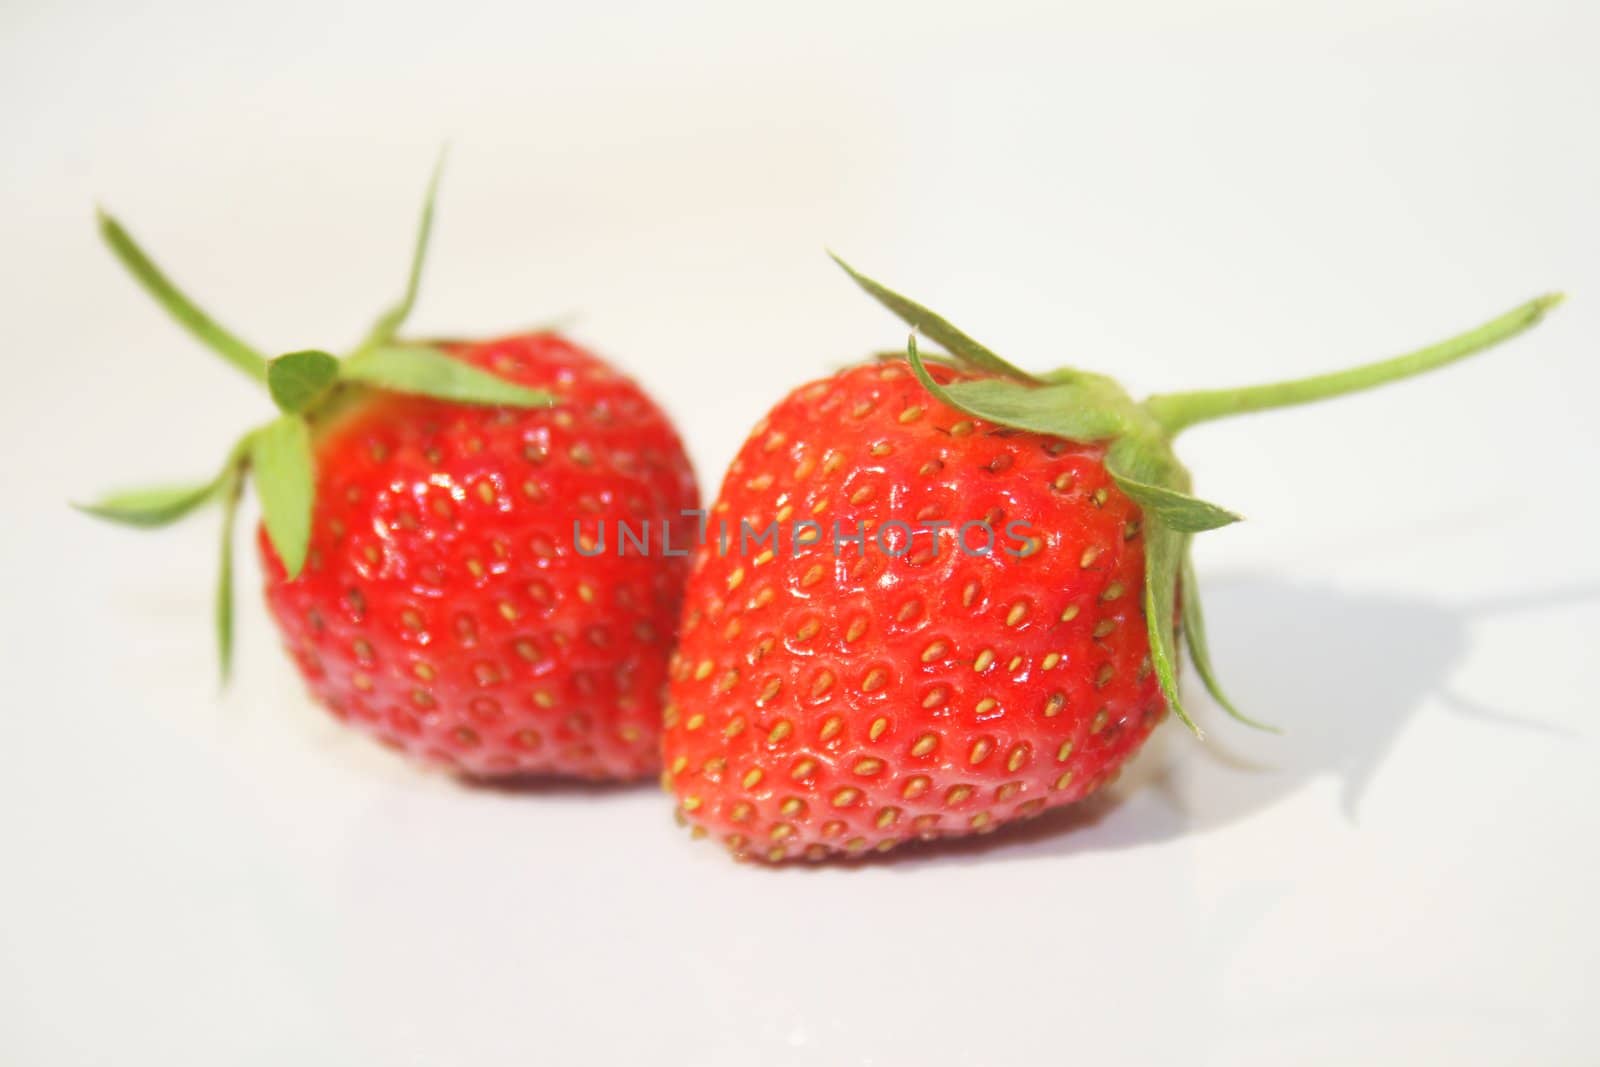 Strawberries by timscottrom